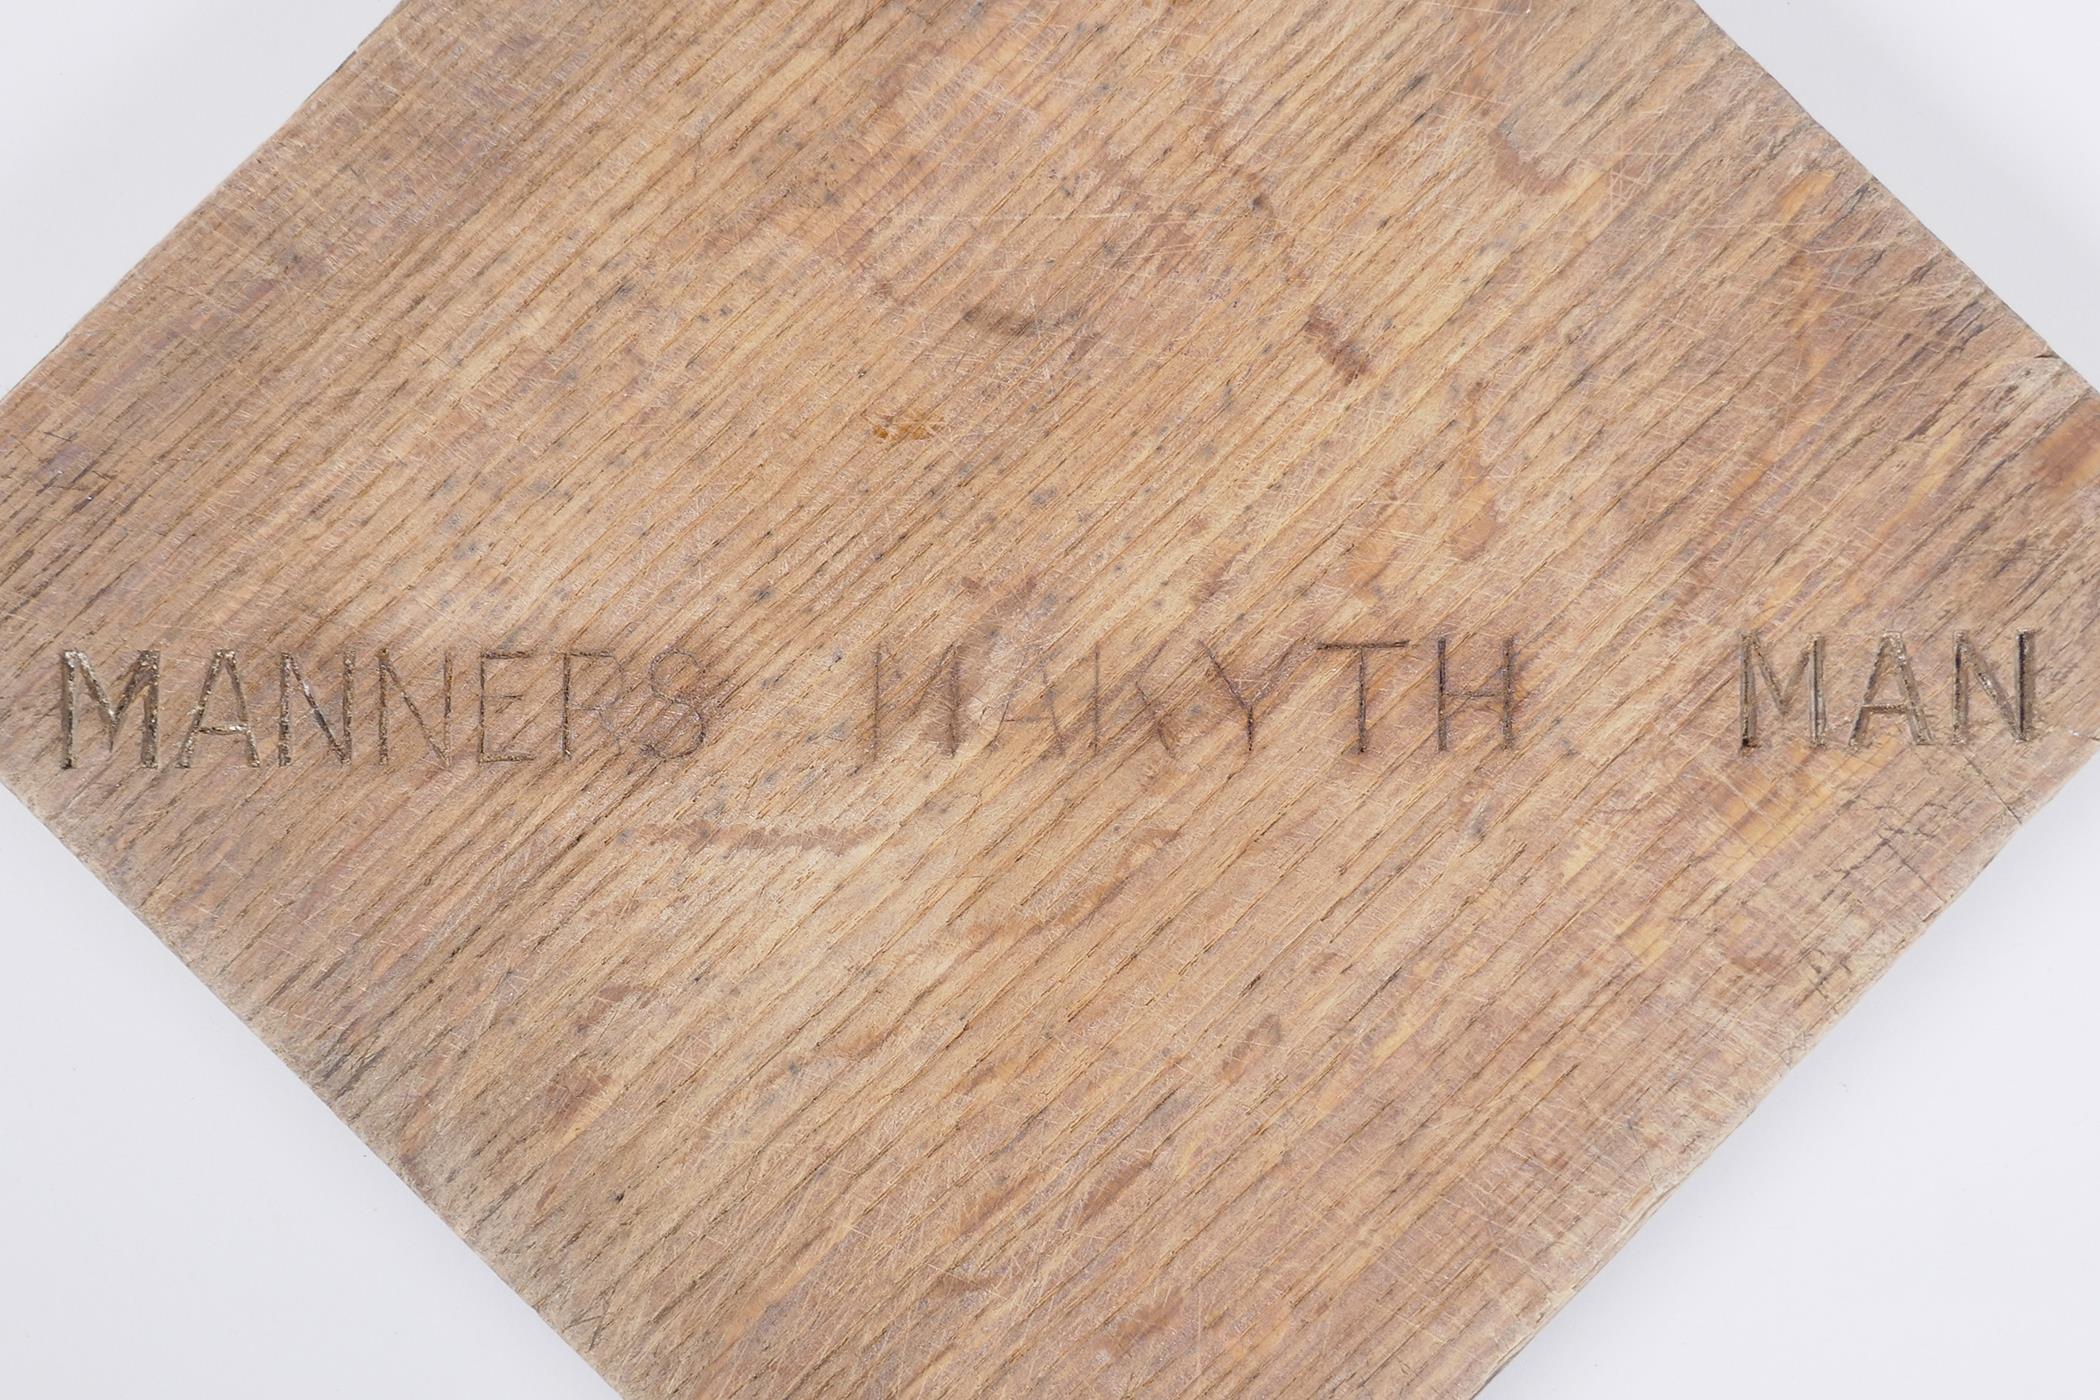 An oak panel with inset hallmarked silver cross potent and the inscription, "Manners Makyth Man". - Image 4 of 4